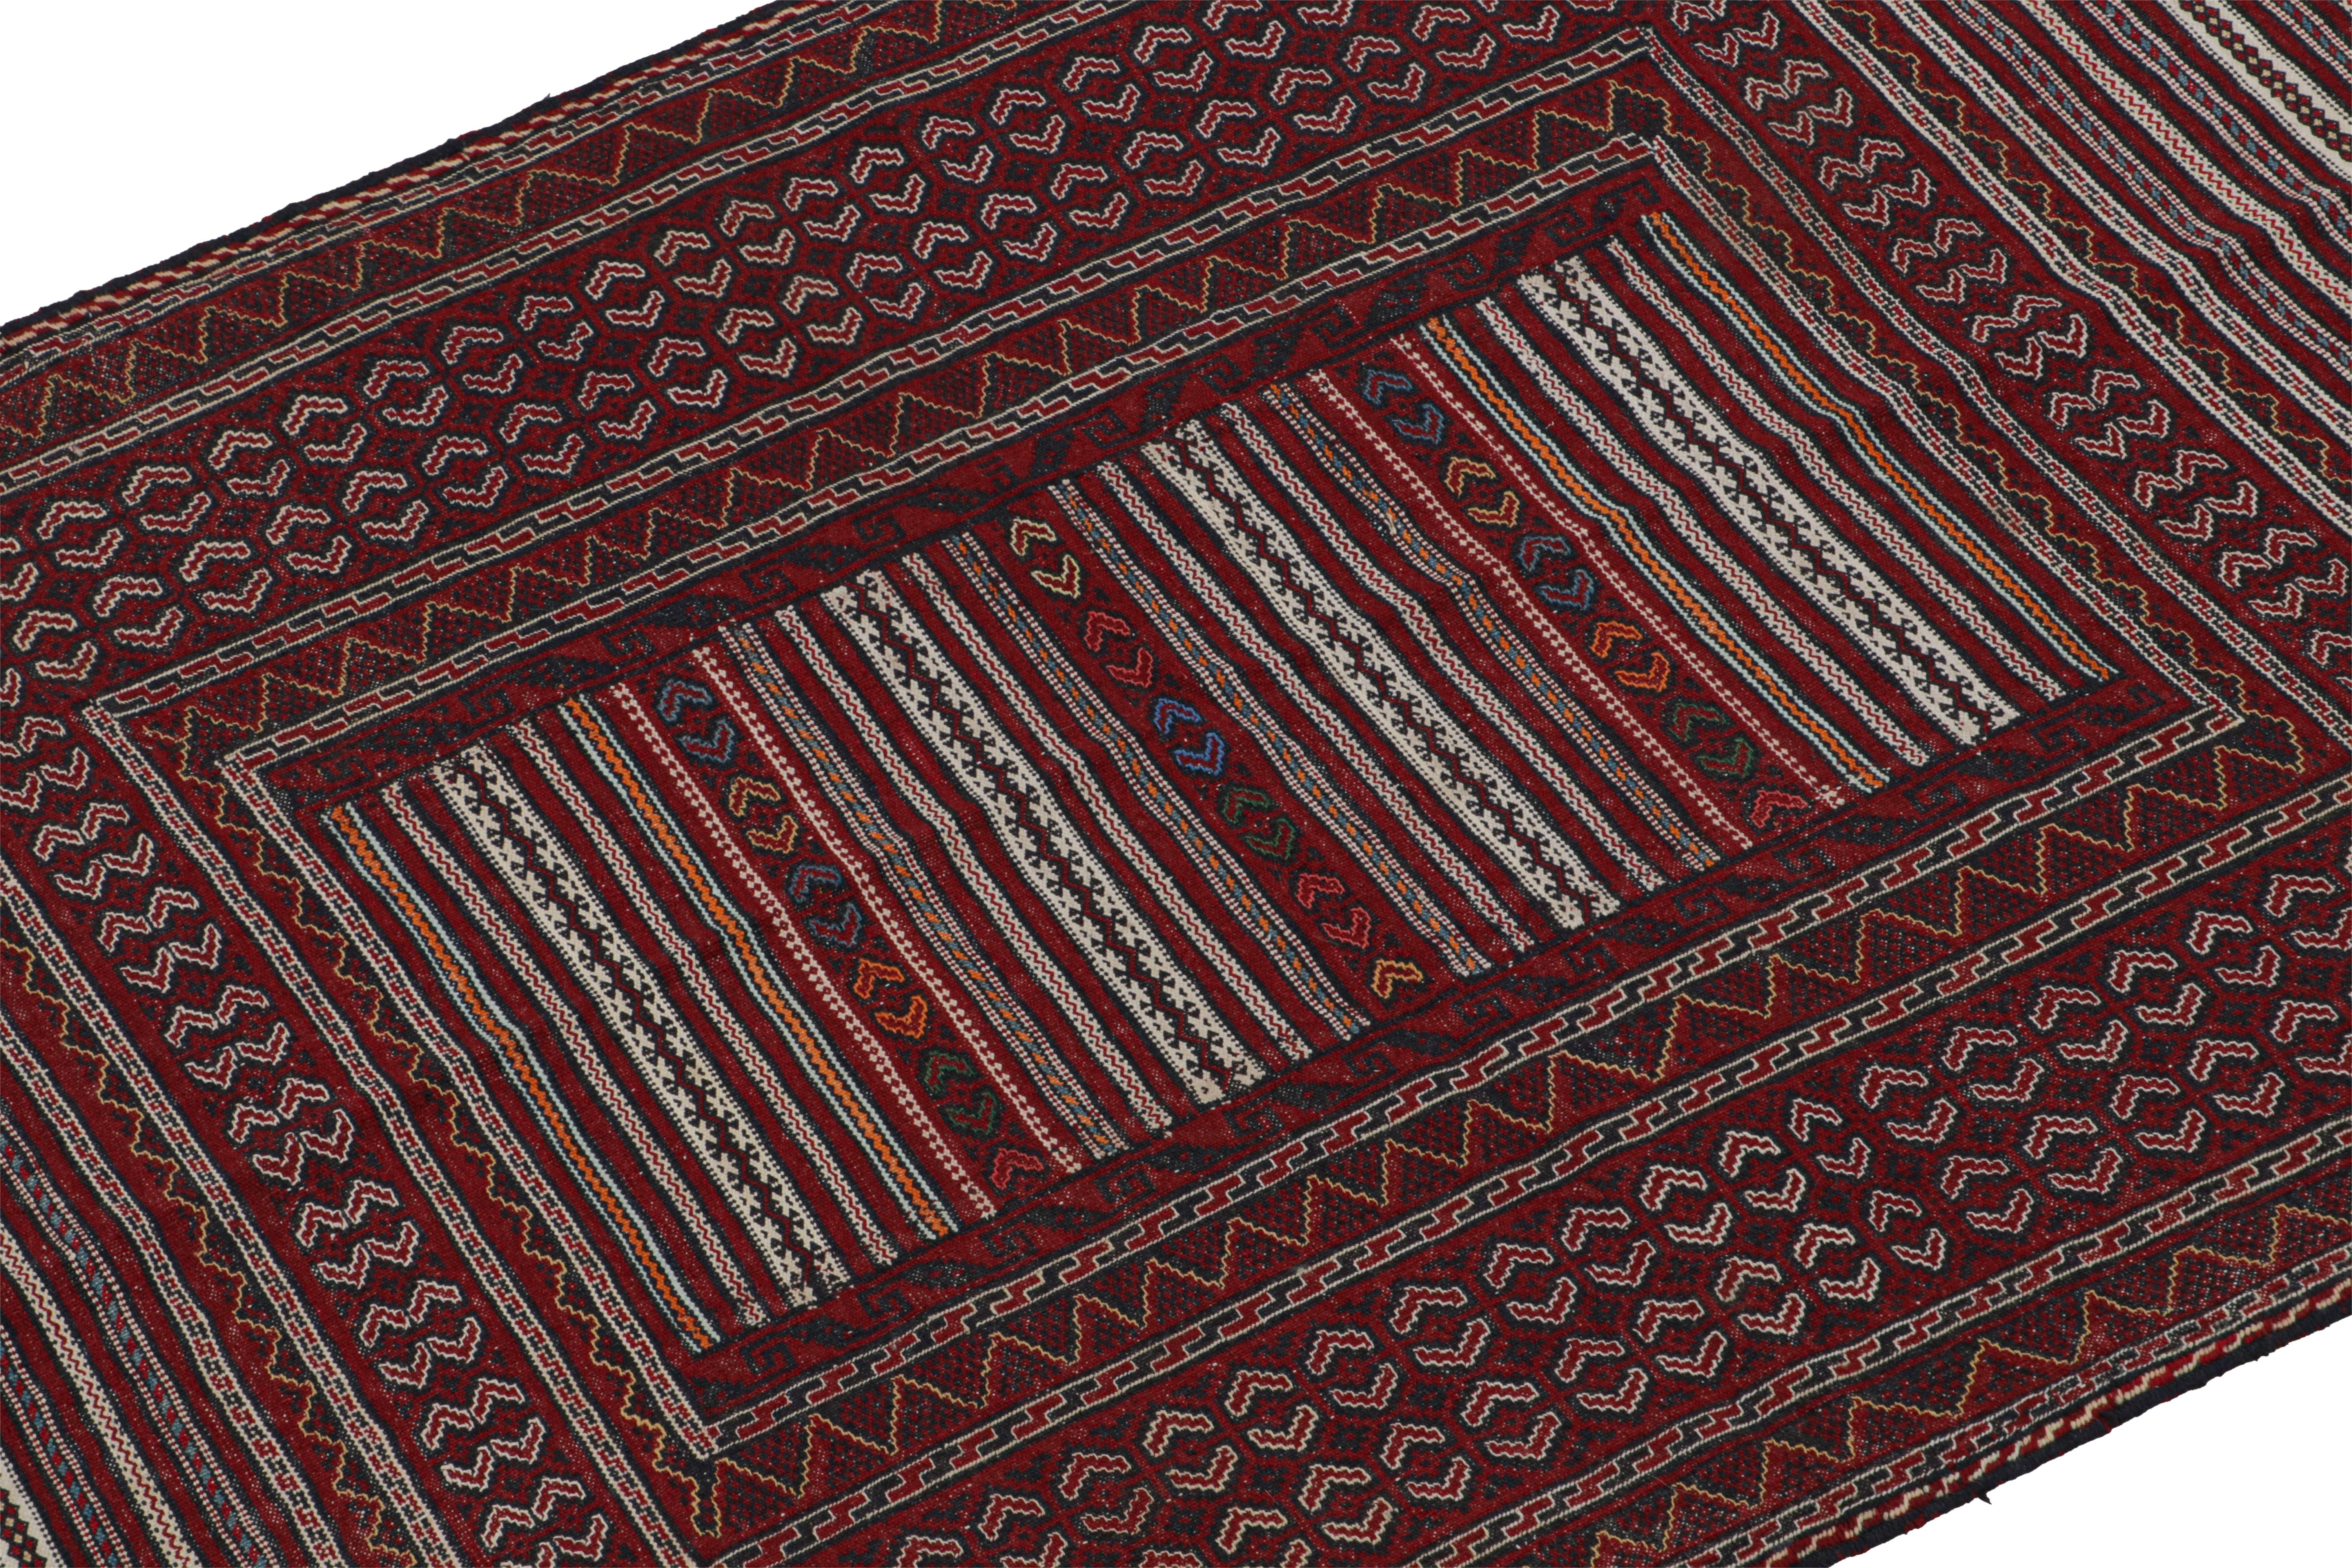 Hand-Woven Vintage Baluch Tribal Kilim in Red with Geometric Patterns, from Rug & Kilim For Sale